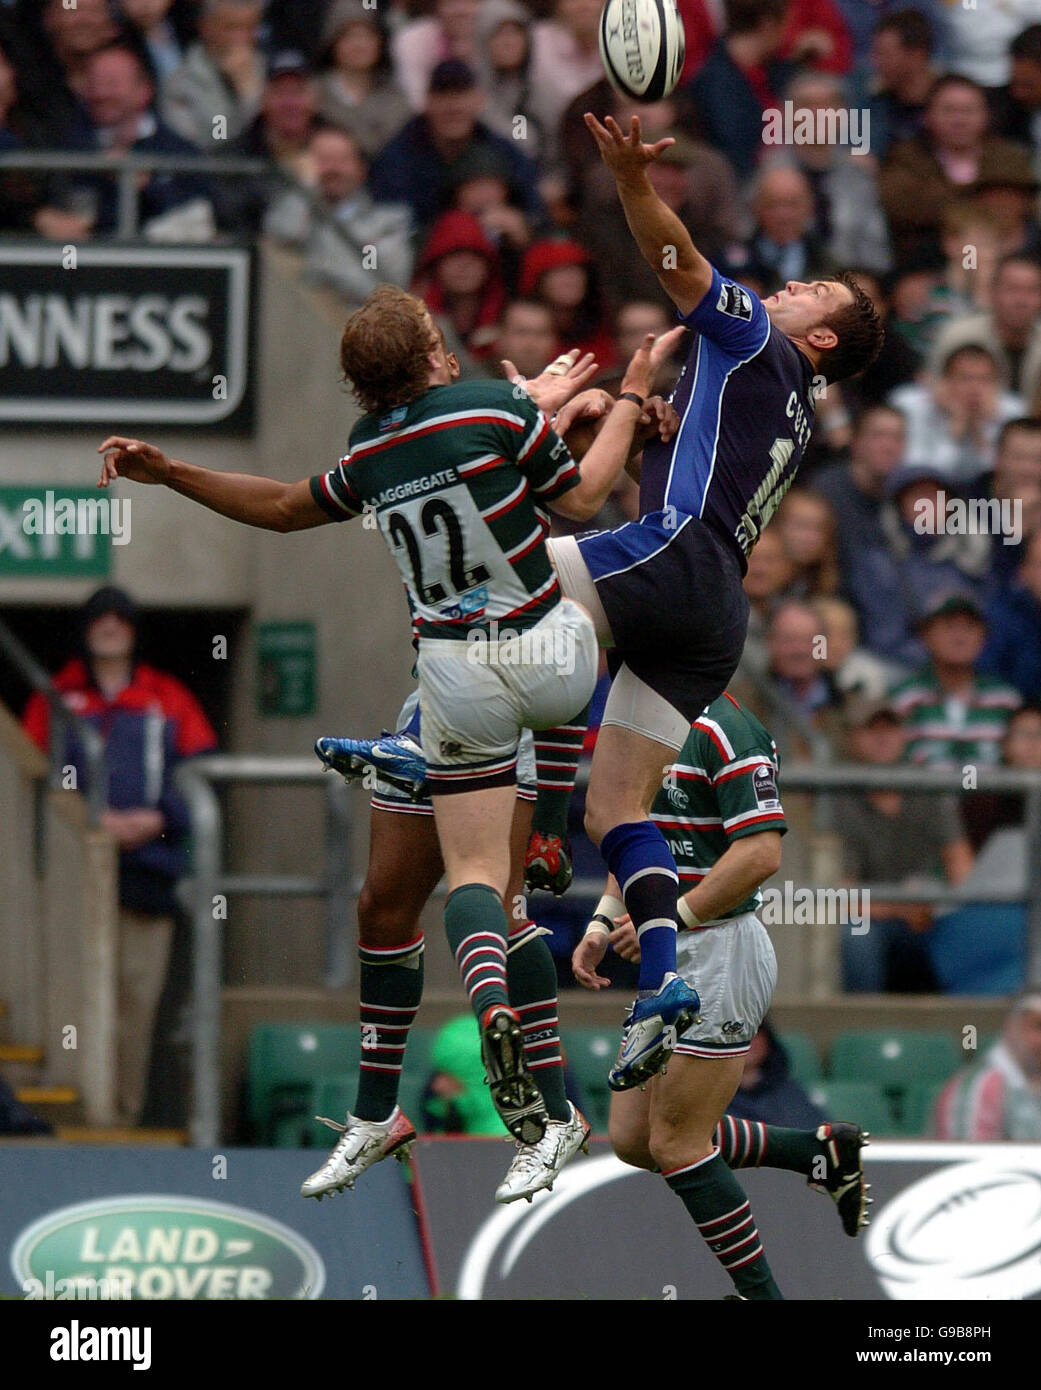 Rugby Union - Guinness Premiership Final 2006 - Sale Sharks v Leicester Tigers - Twickenham. Sale Sharks' Mark Cueto and Leicester Tigers' Leon Lloyd Stock Photo